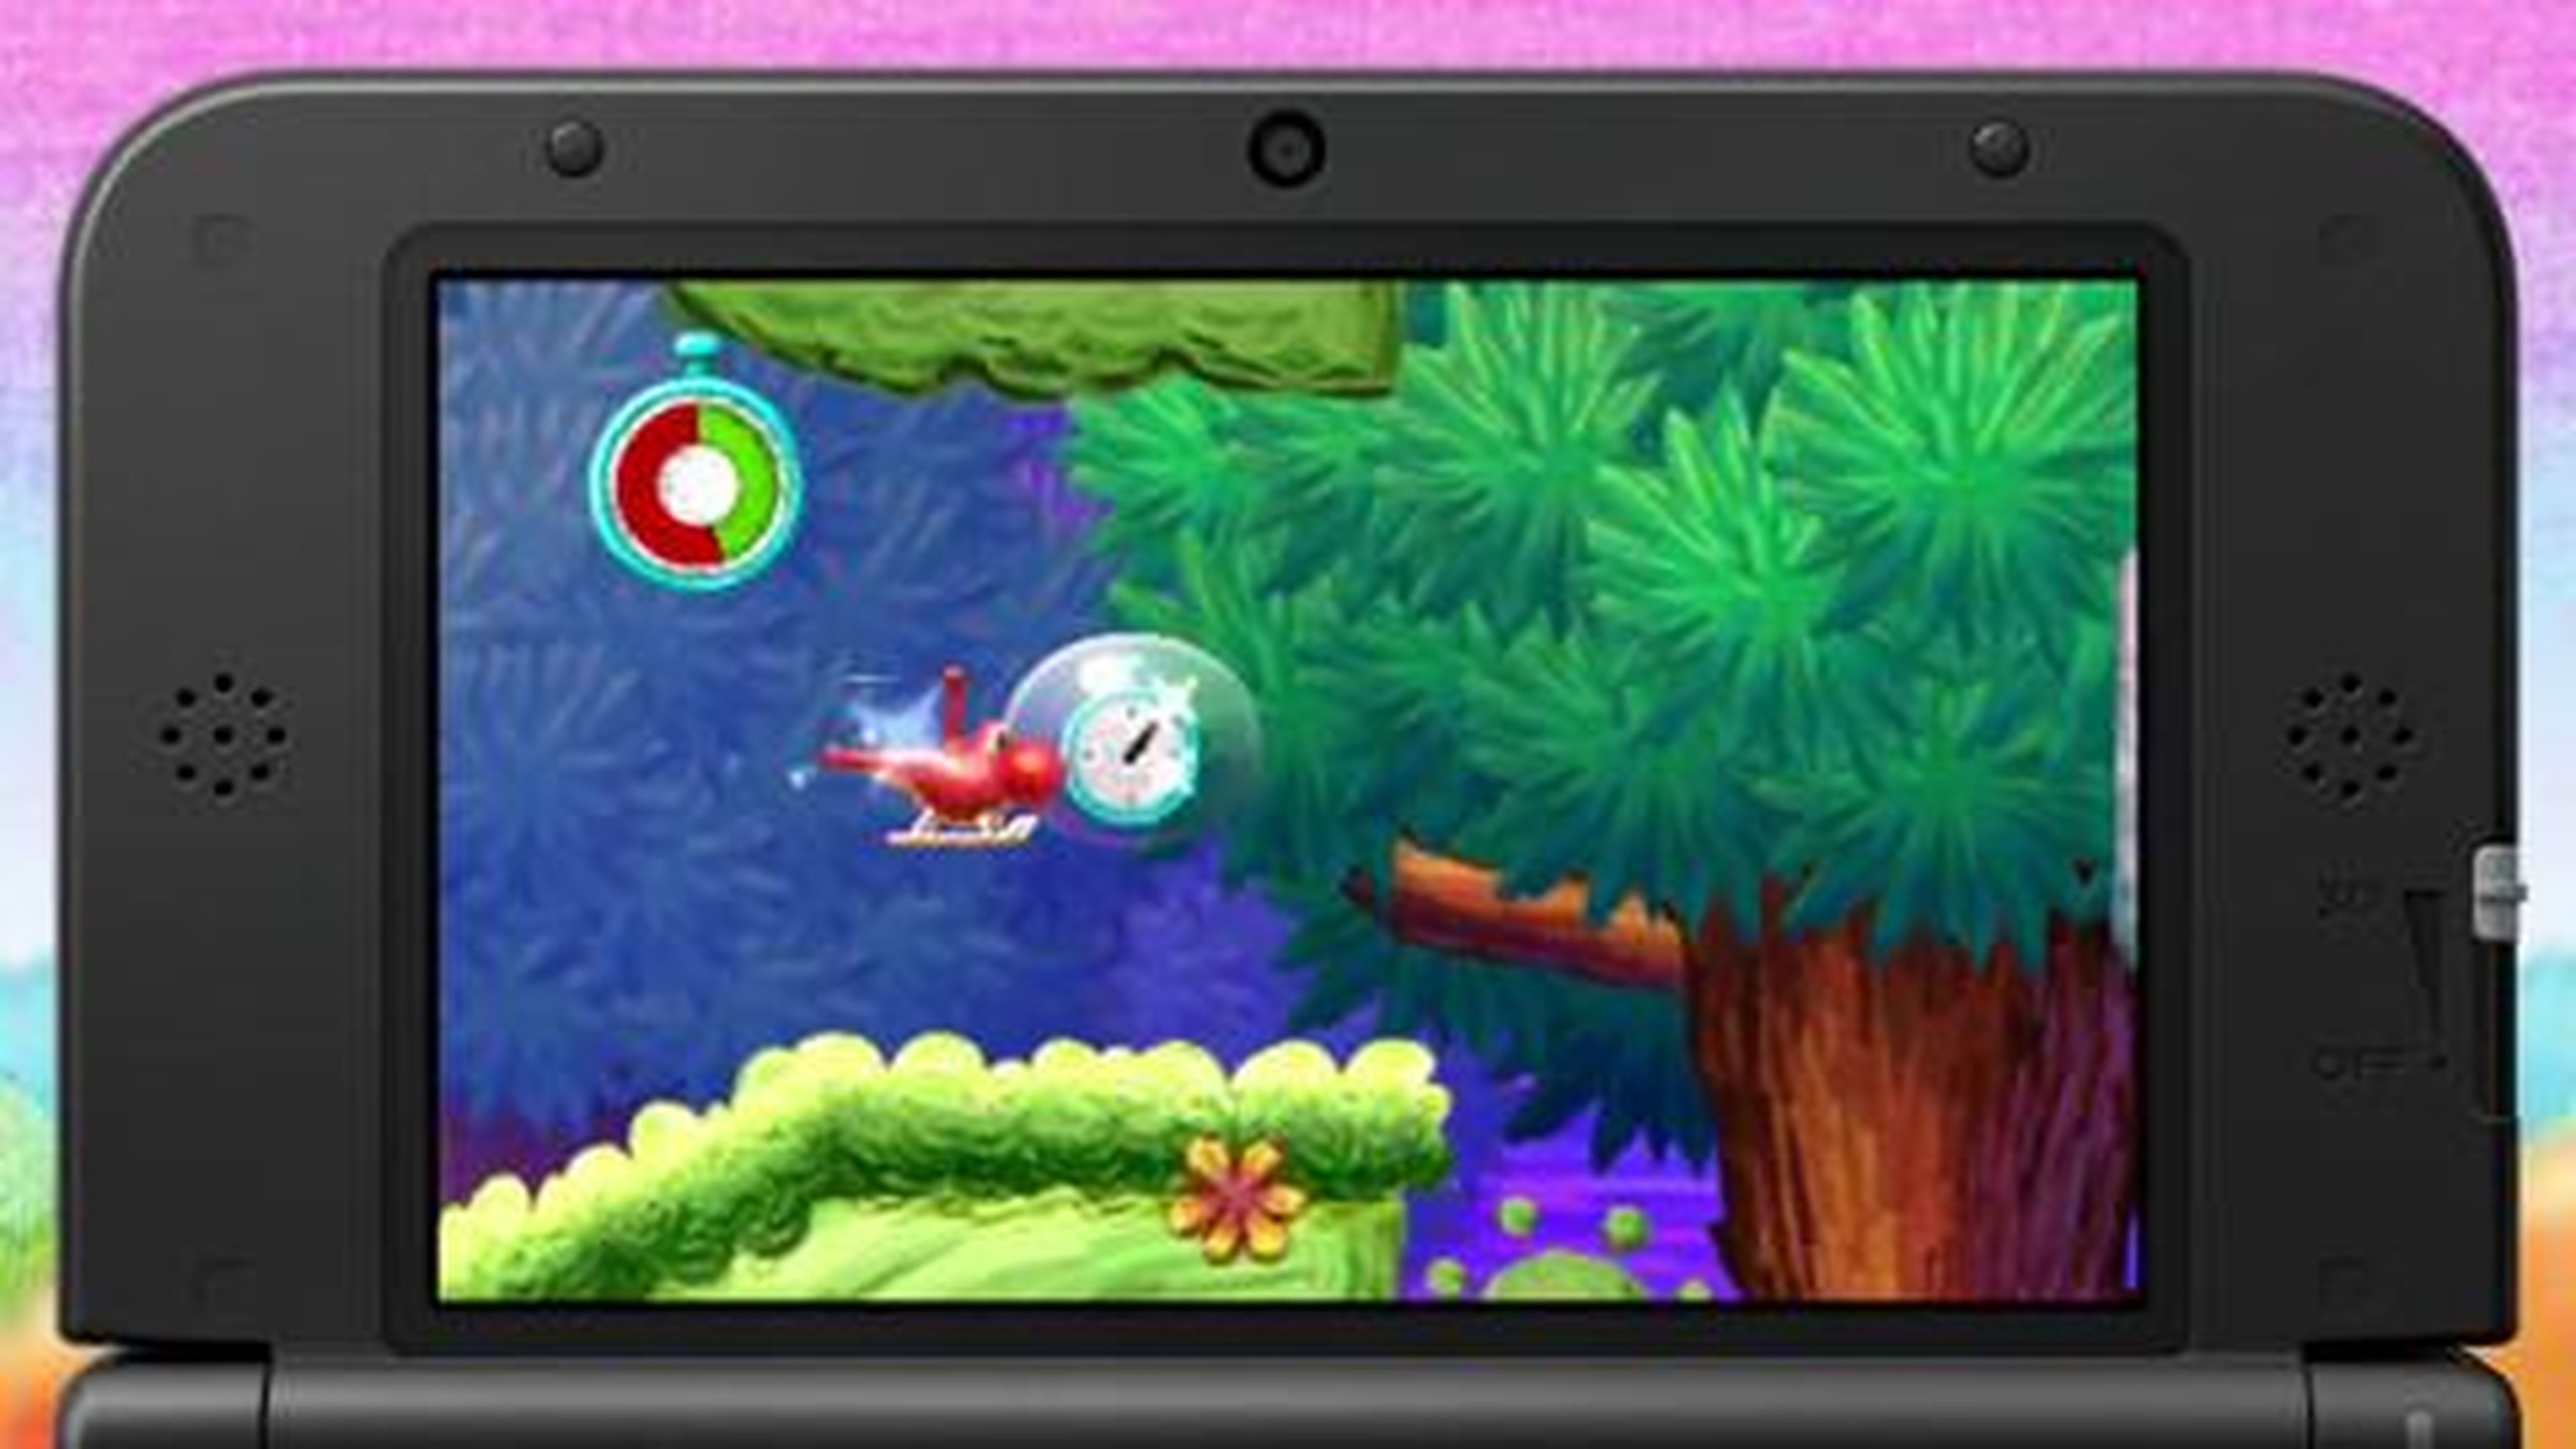 Nintendo 3DS - Yoshi's New Island - It's a Shell of a Time Trailer